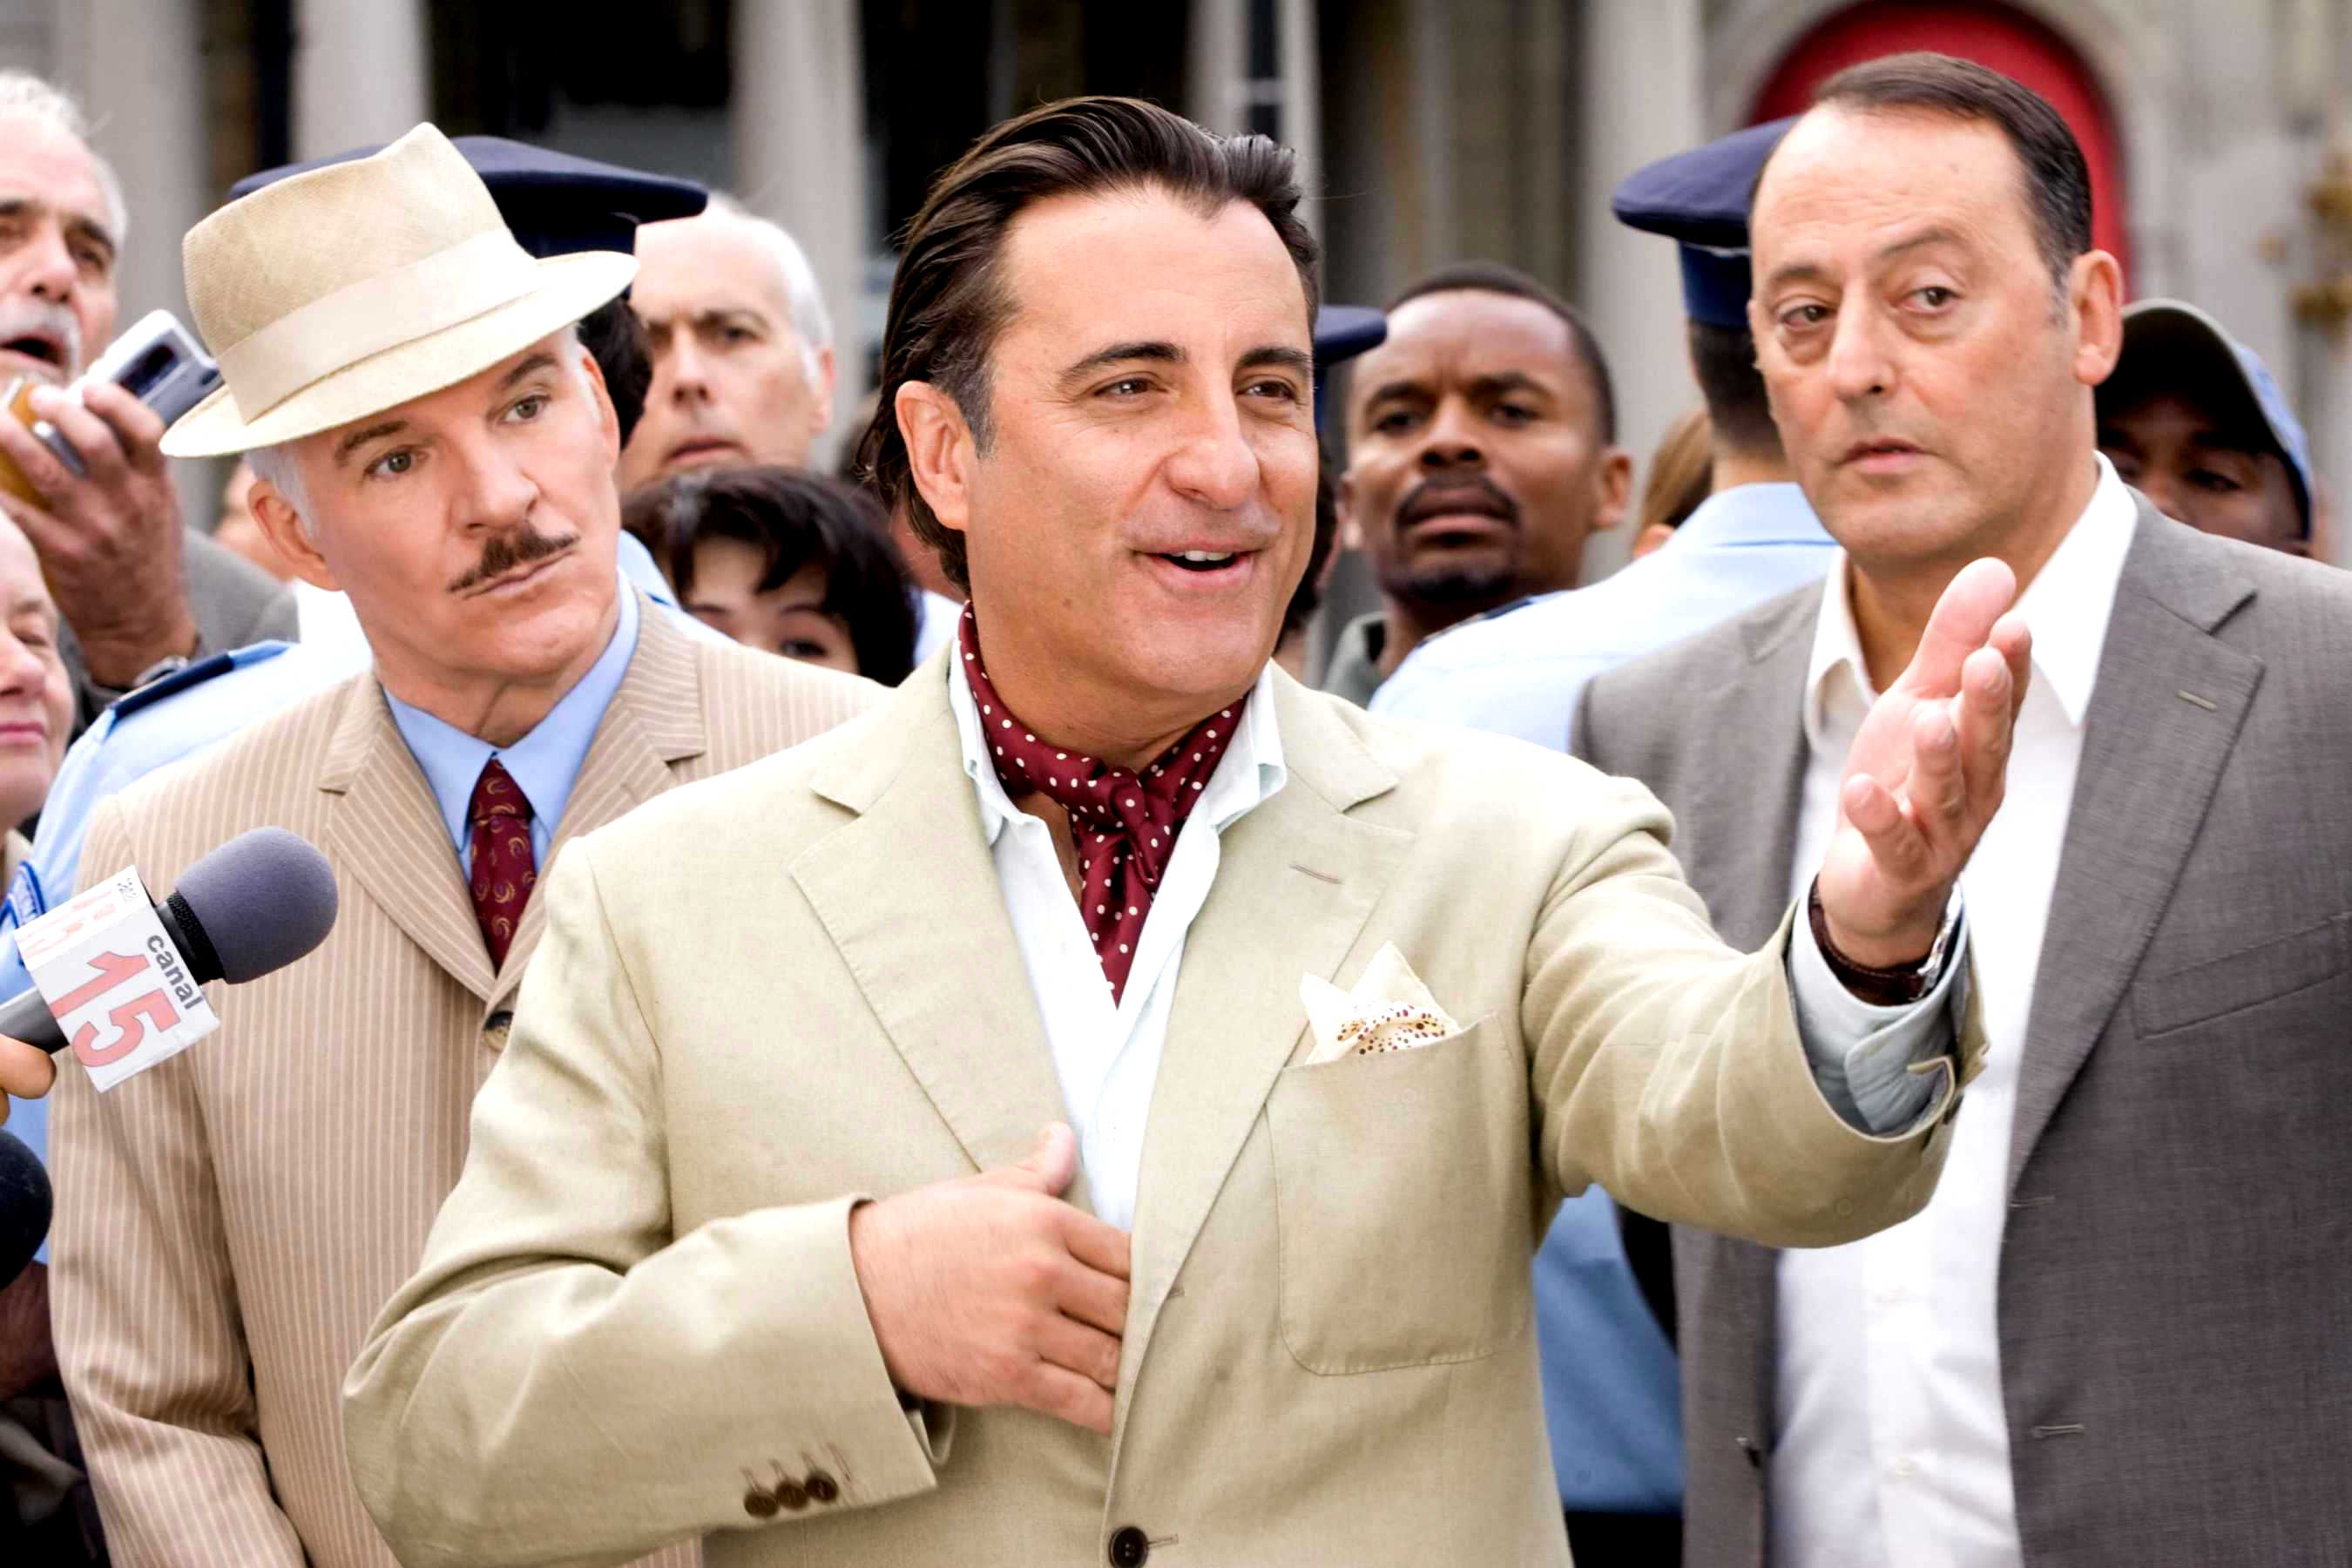 Steve Martin, Andy Garcia and Jean Reno in Columbia Pictures' The Pink Panther 2 (2009). Photo credit by Peter Iovino.